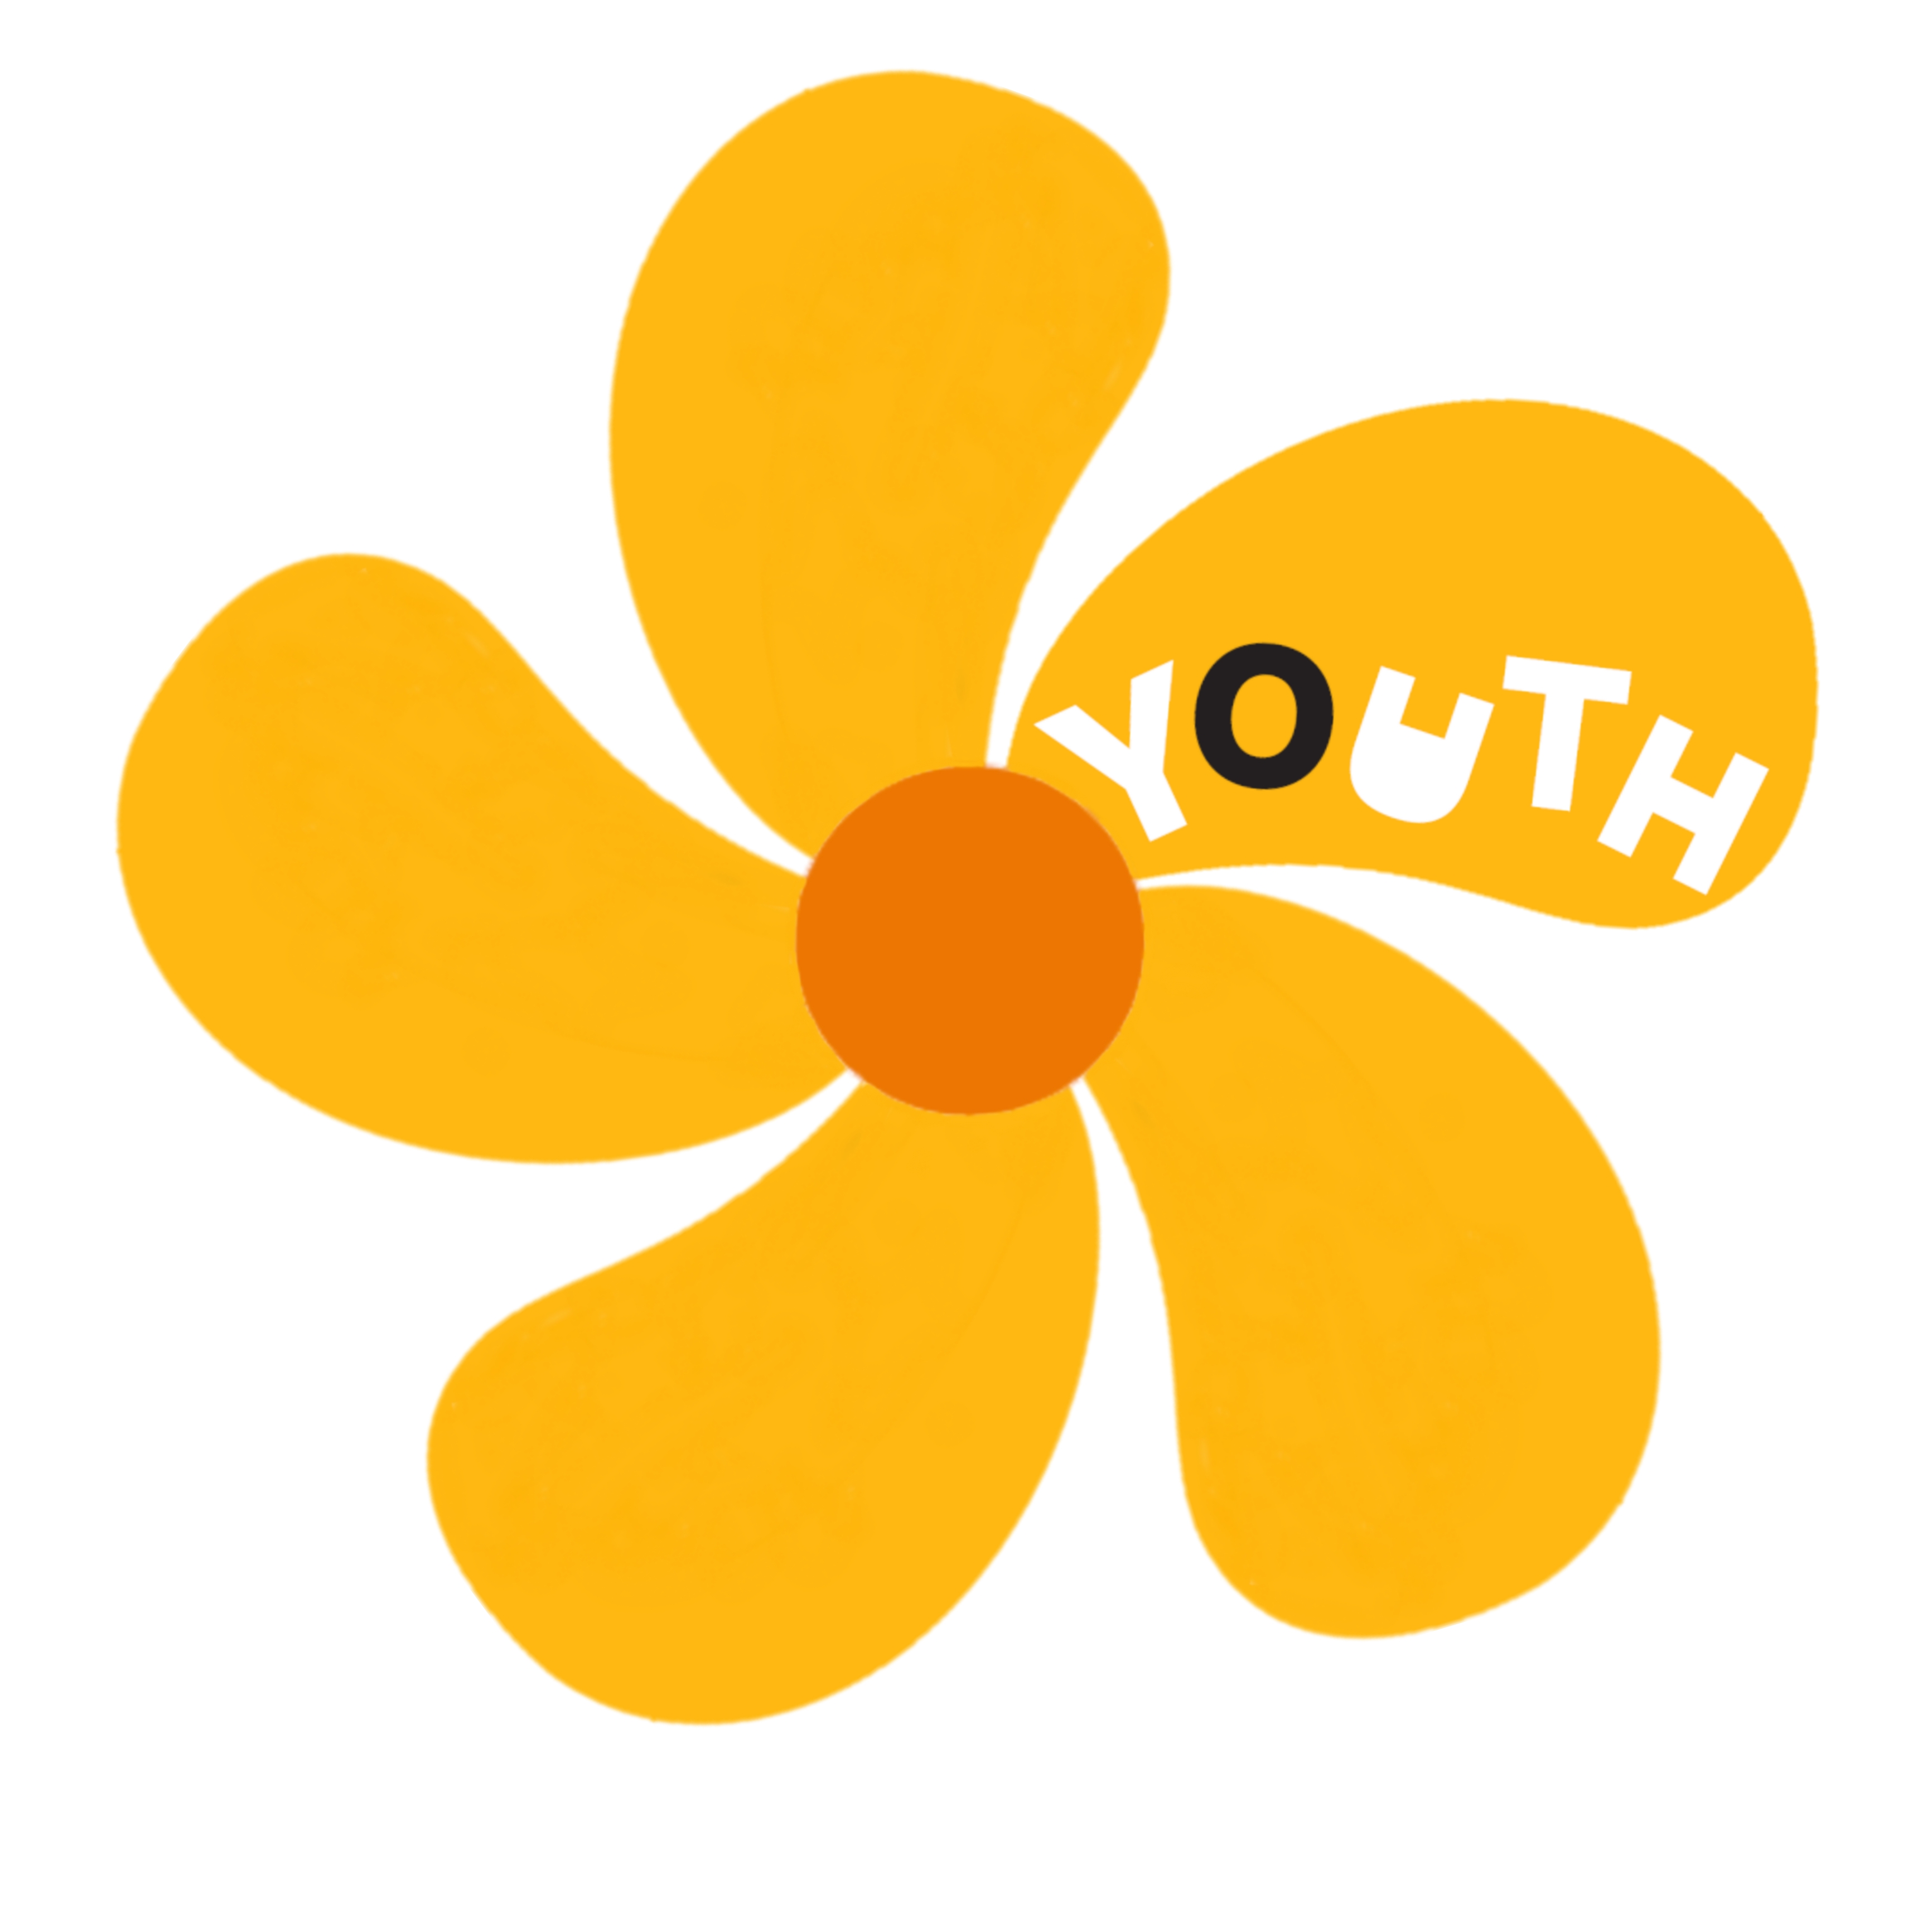 The Bloom Podcast logo - a yellow flower with the word 'Youth' on a petal